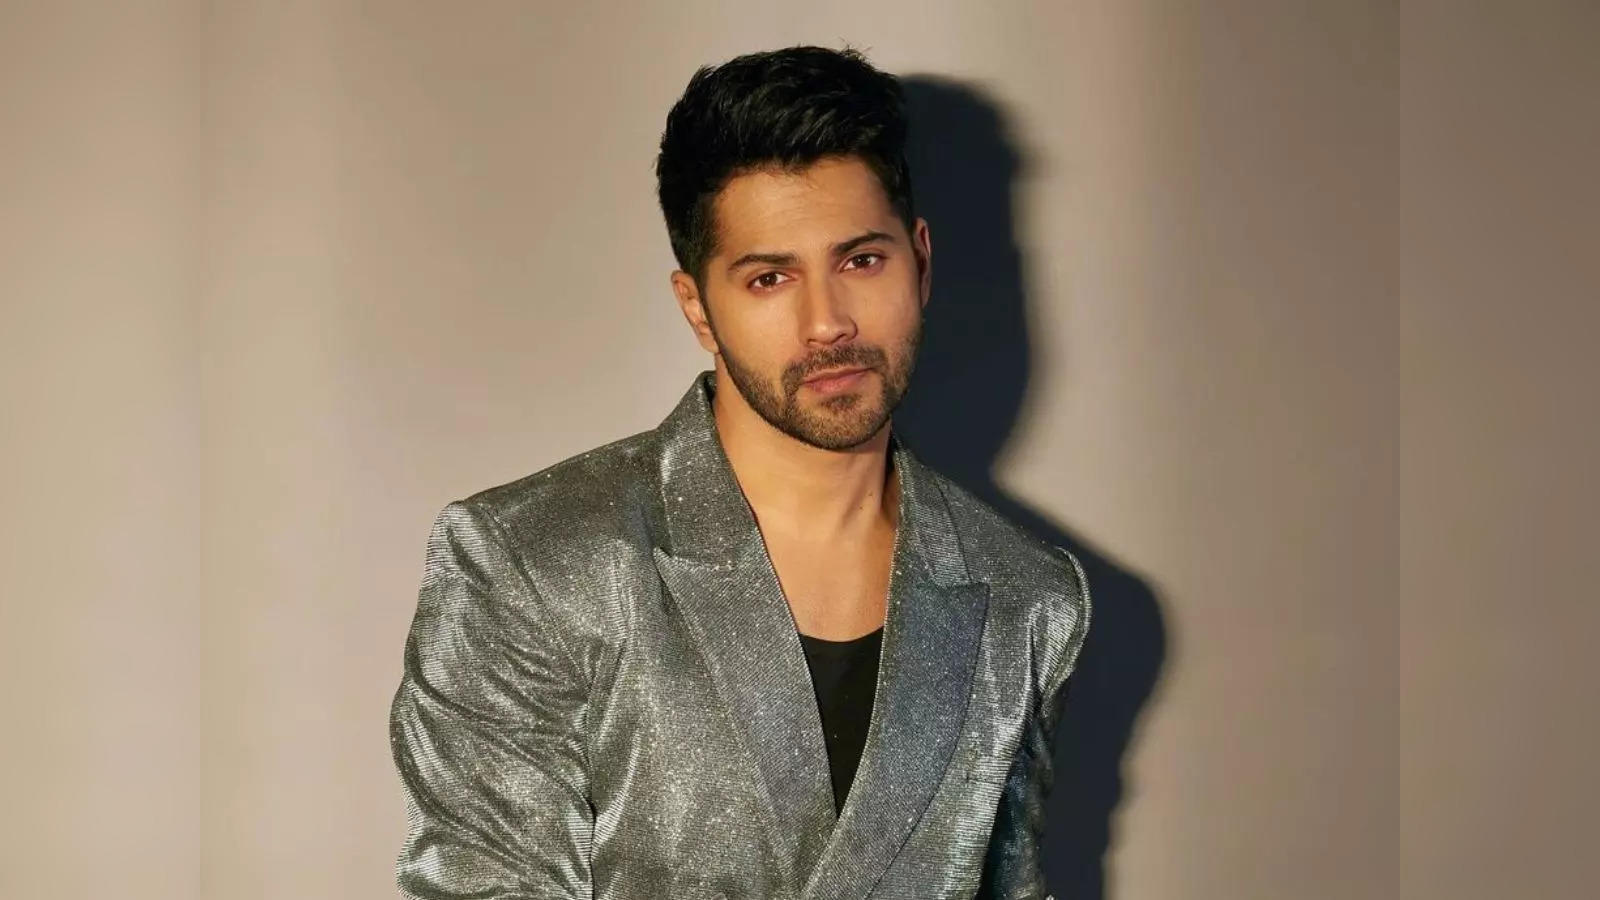 Varun Dhawan's flooded with too many offers post the success of 'Judwaa 2'